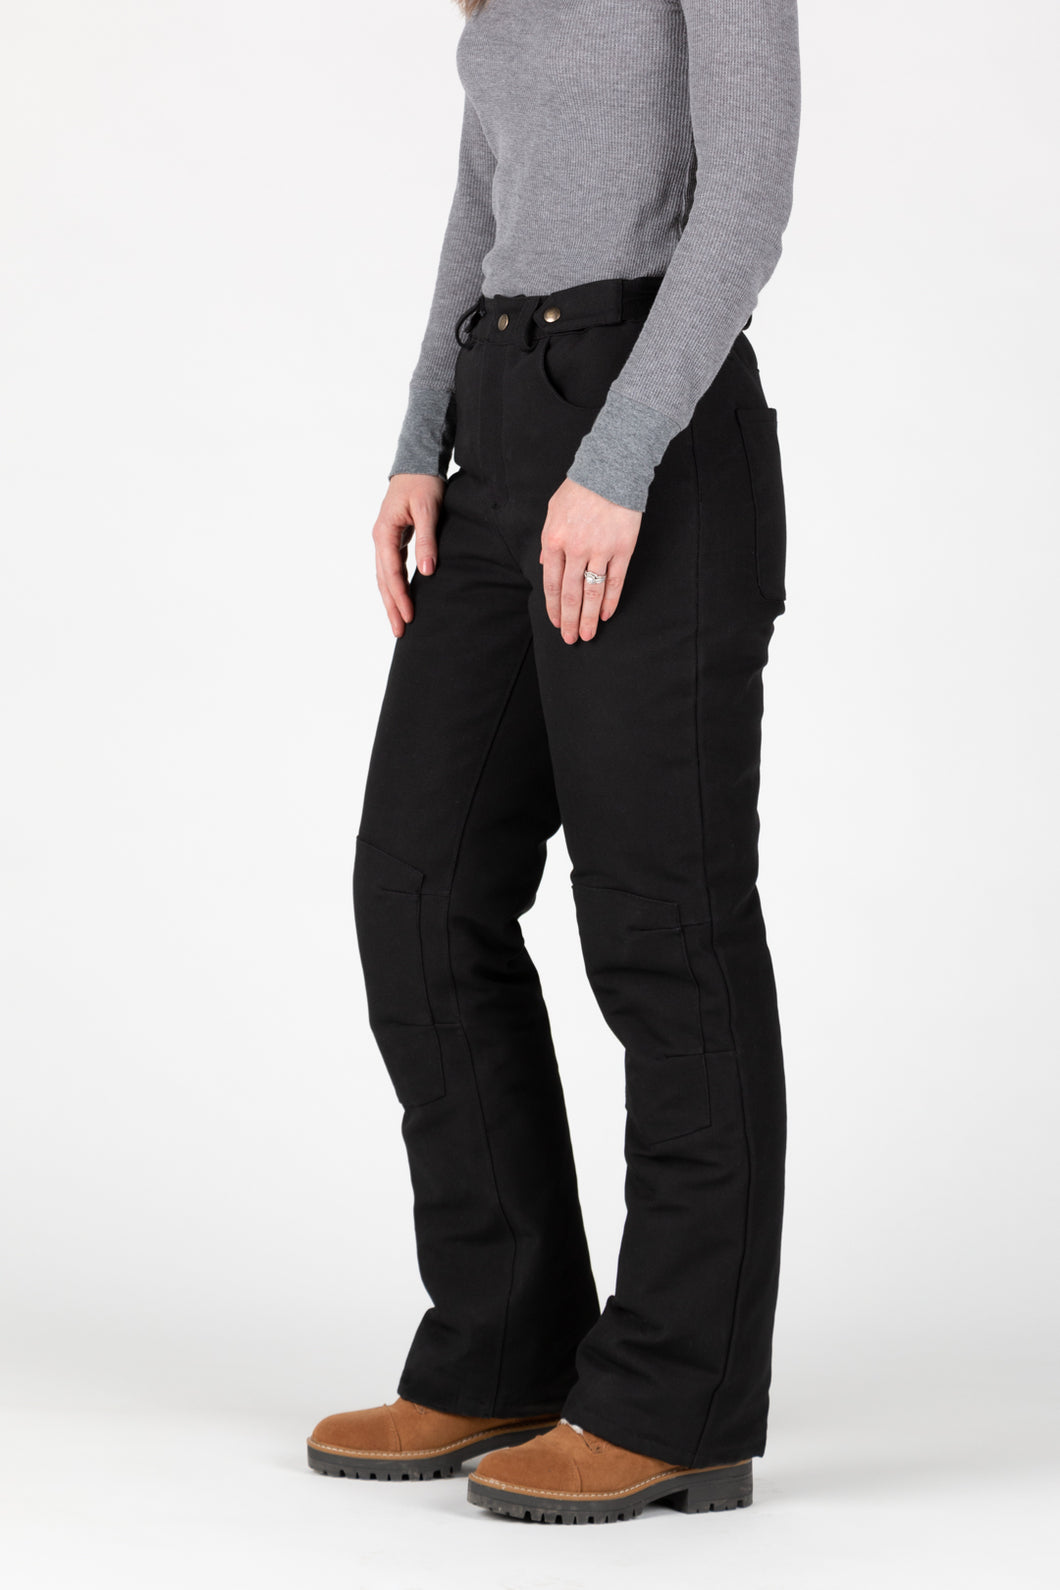 Black insulated work pants